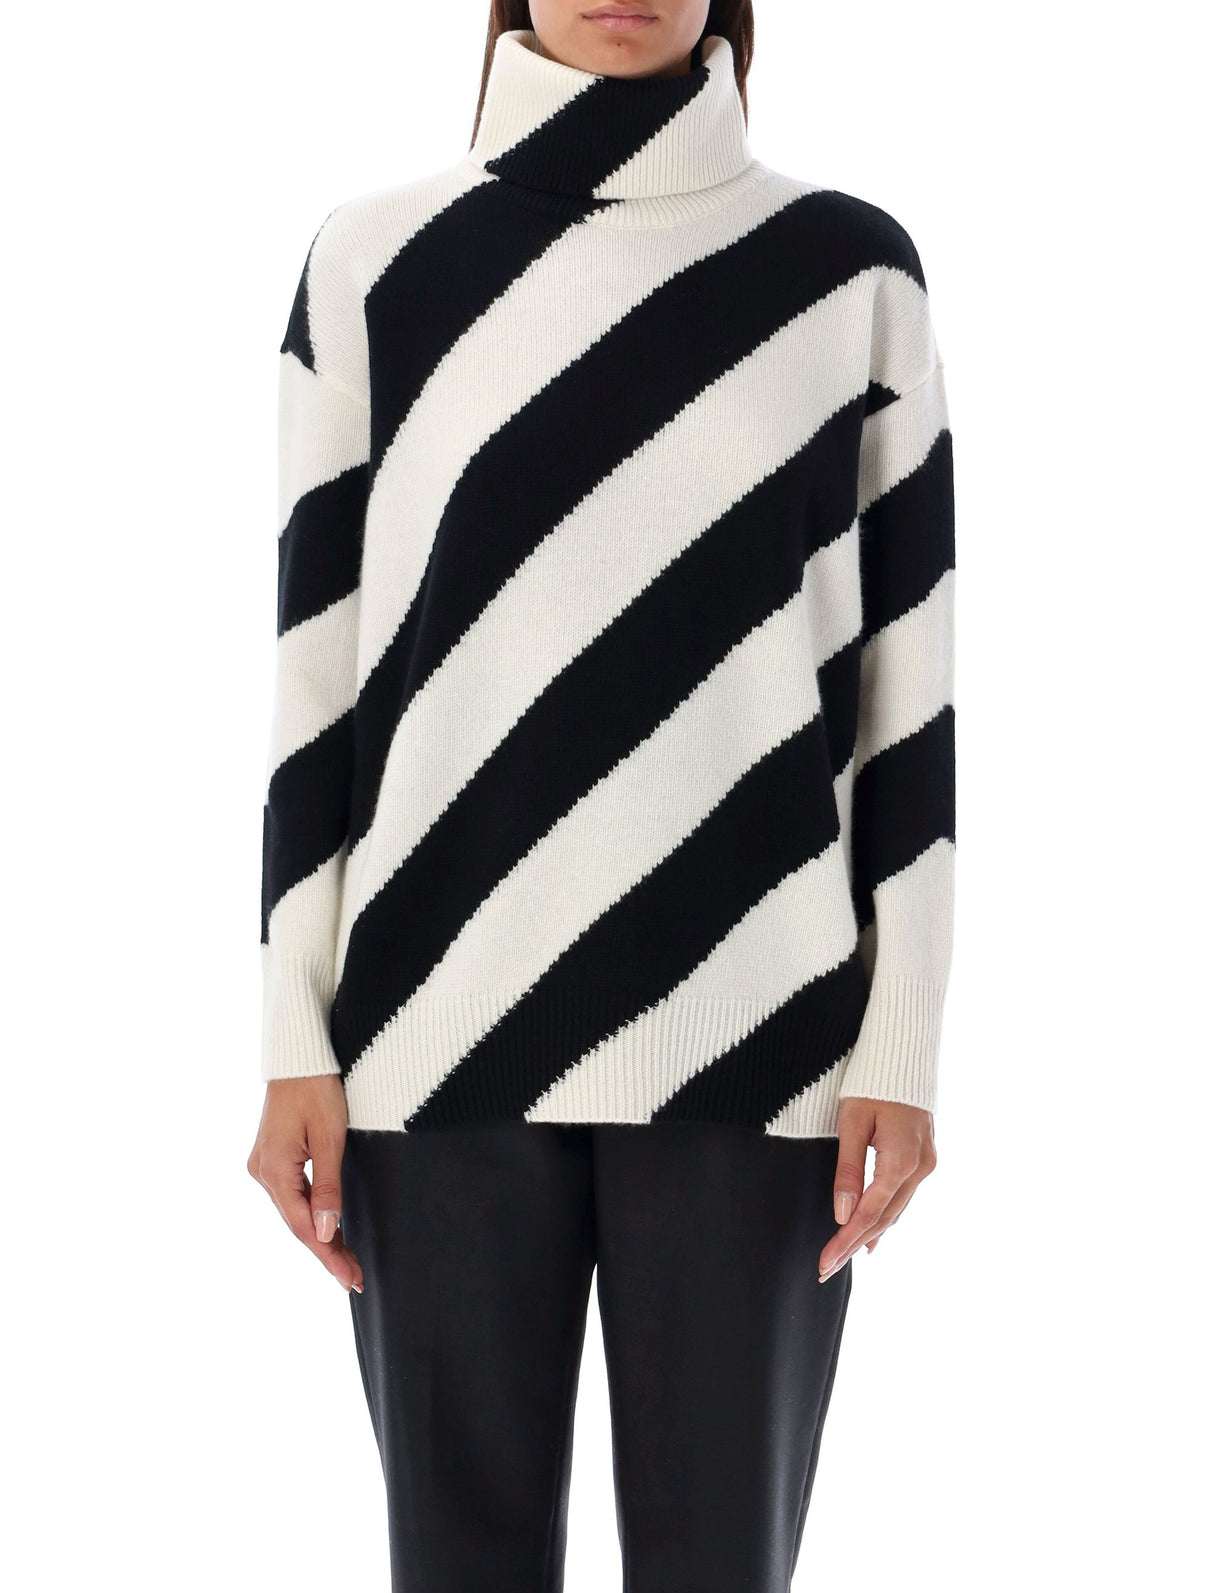 Women's High Neck Stripes Sweater - FW23 Collection